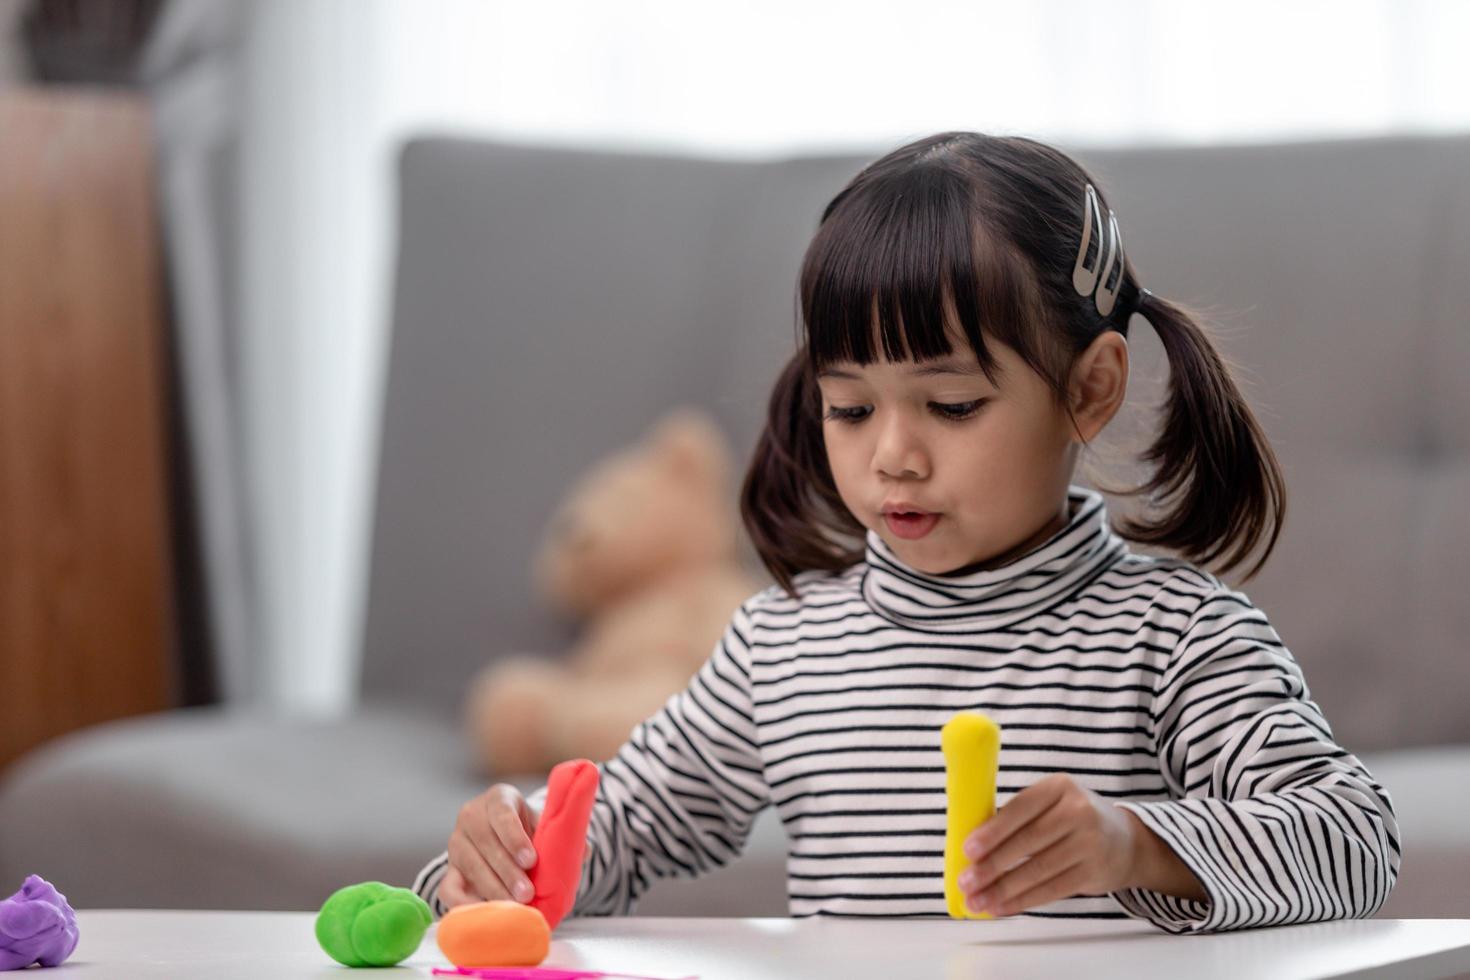 The little girl is learning to use colorful play dough in a well lit room photo